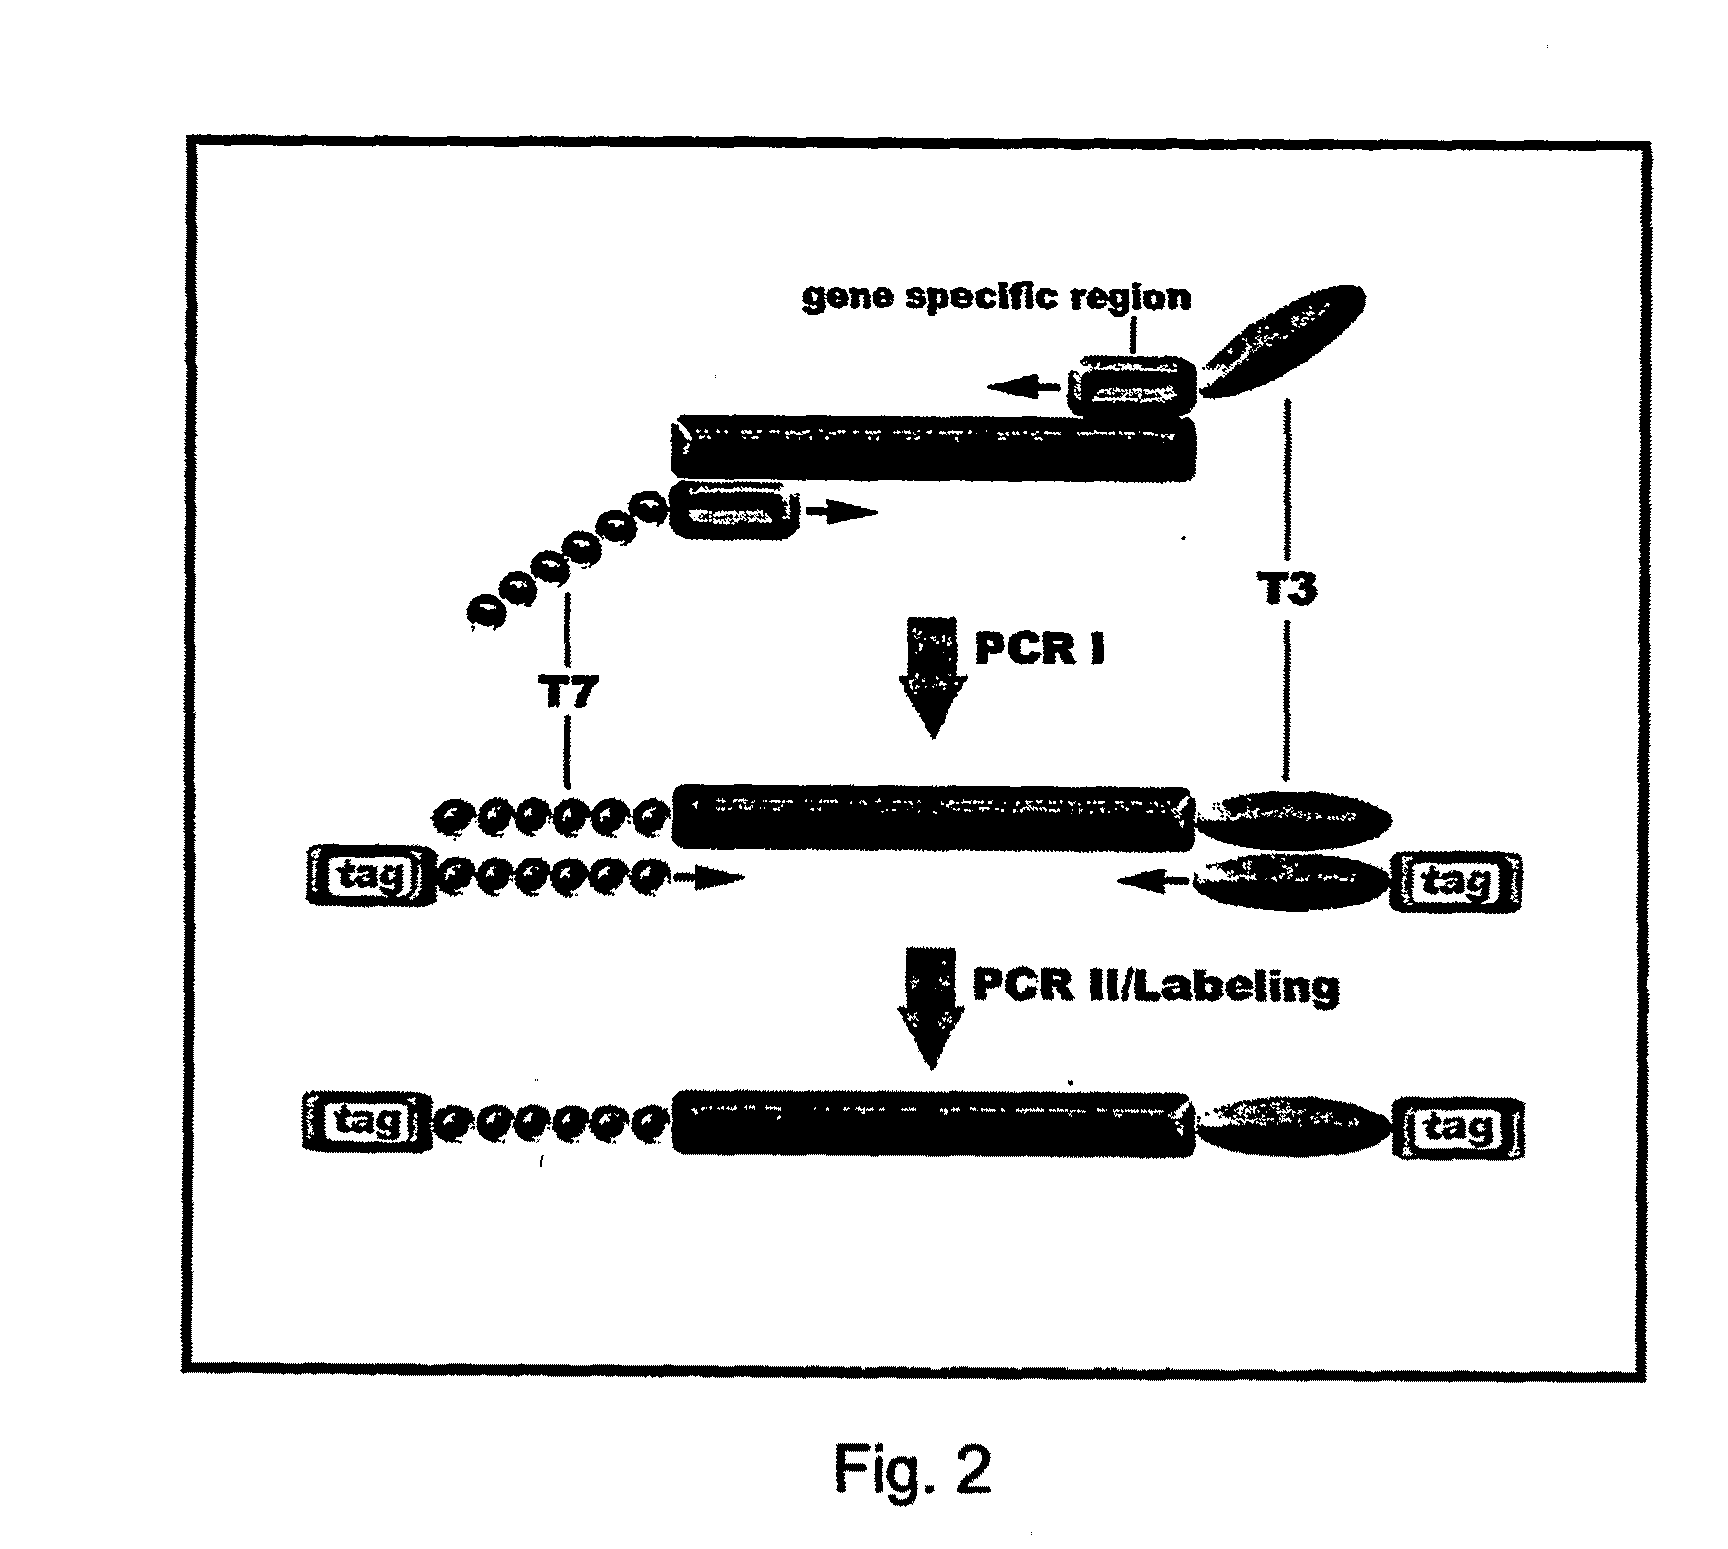 Methods for identifying multiple DNA alteration markers in a large background of wild-type DNA